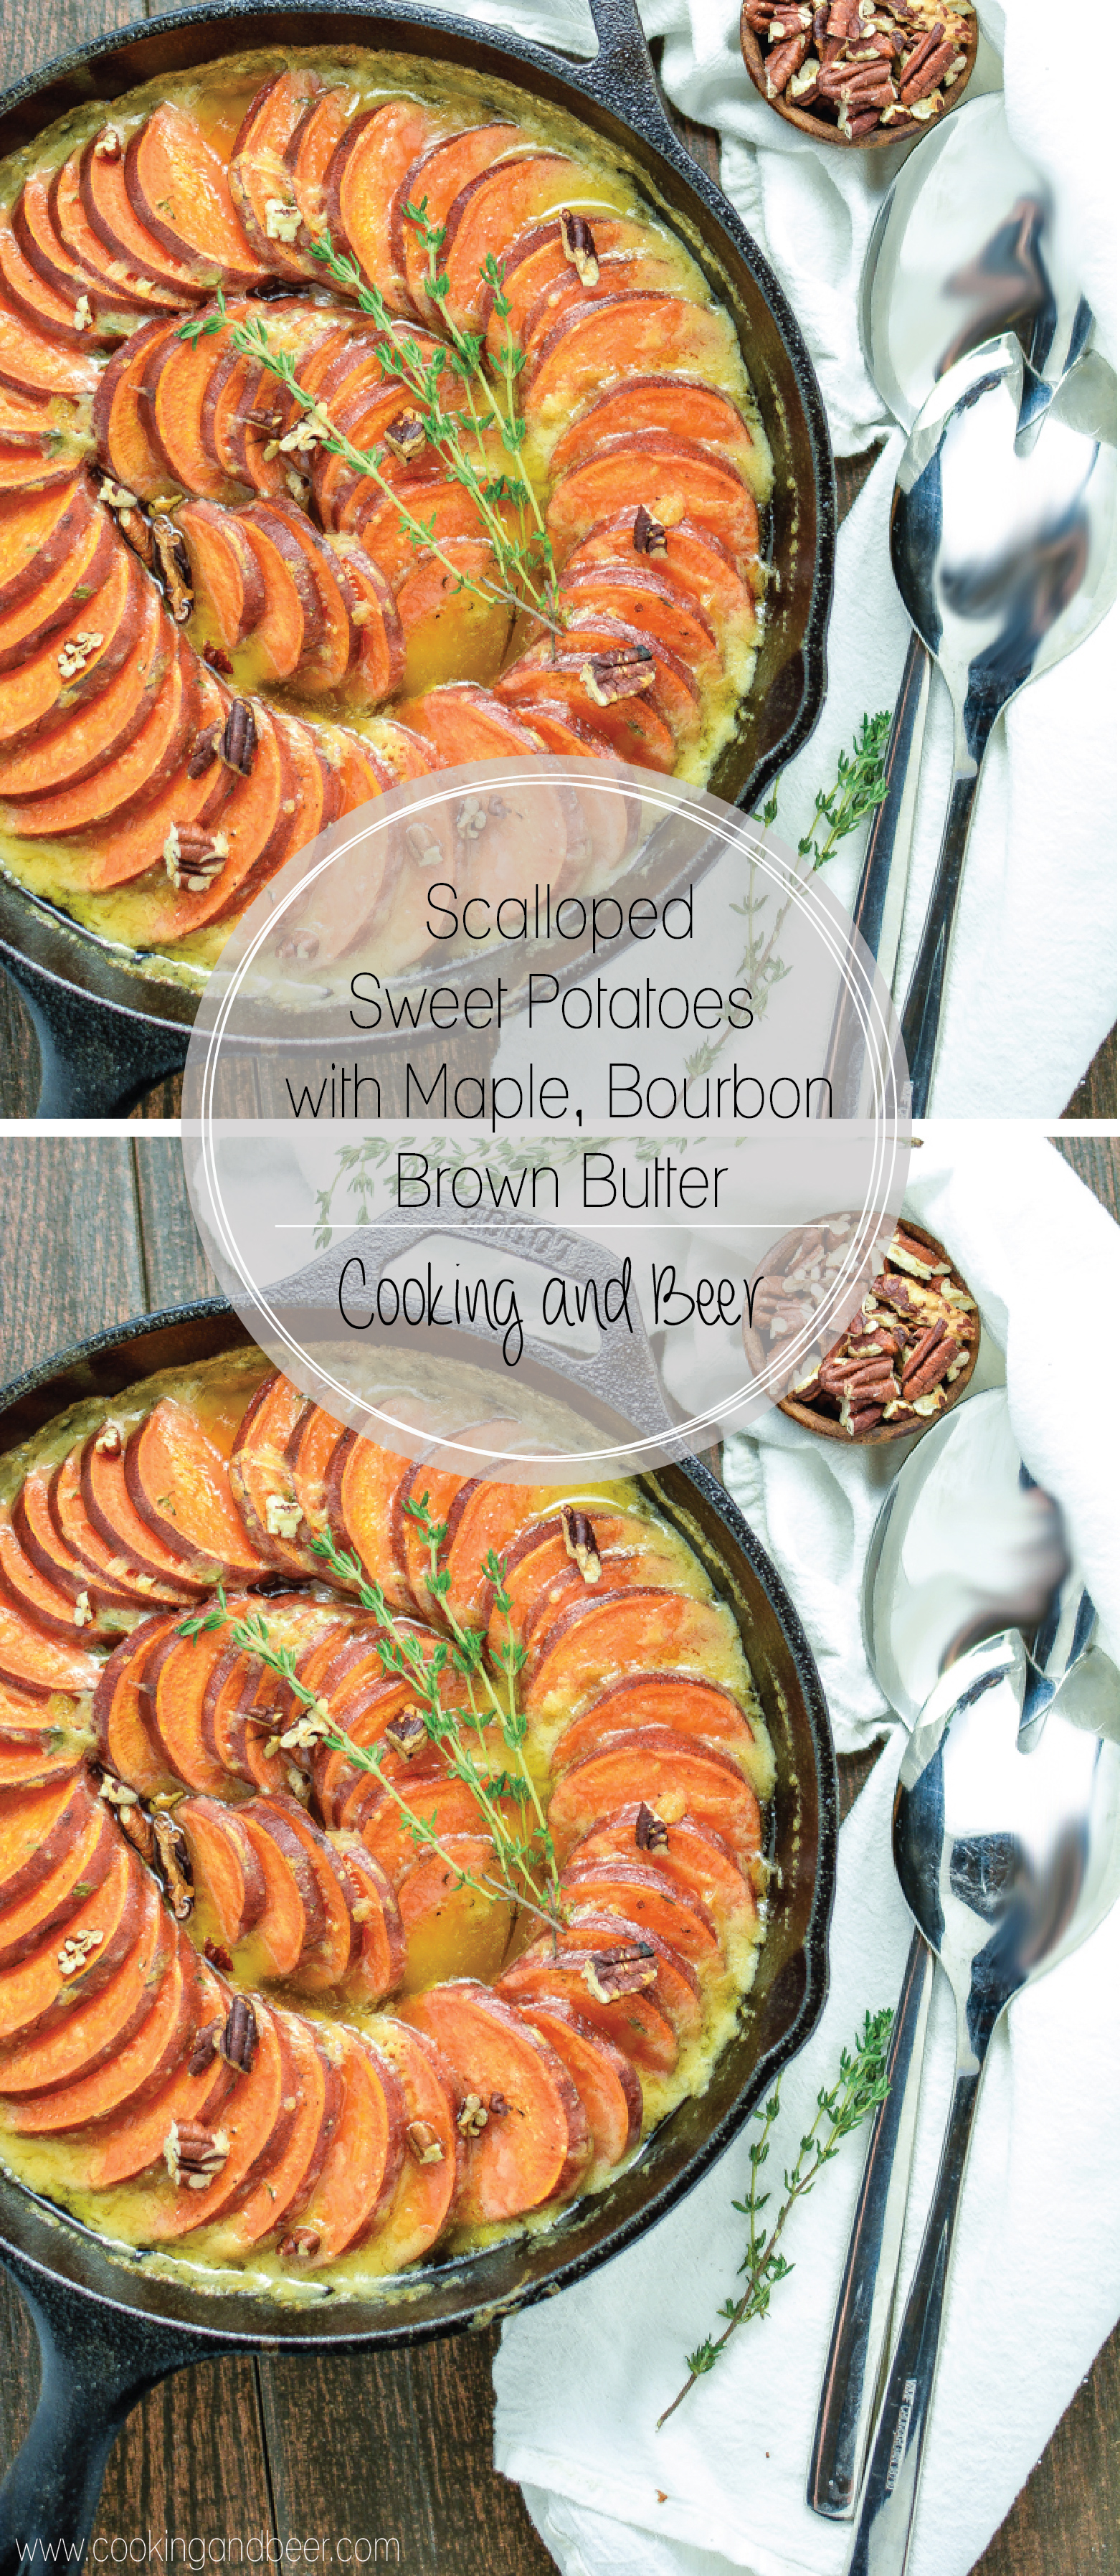 Skillet Scalloped Sweet Potatoes with Maple Bourbon Brown Butter is a must-have side dish recipe for your Thanksgiving Day dinner spreads.